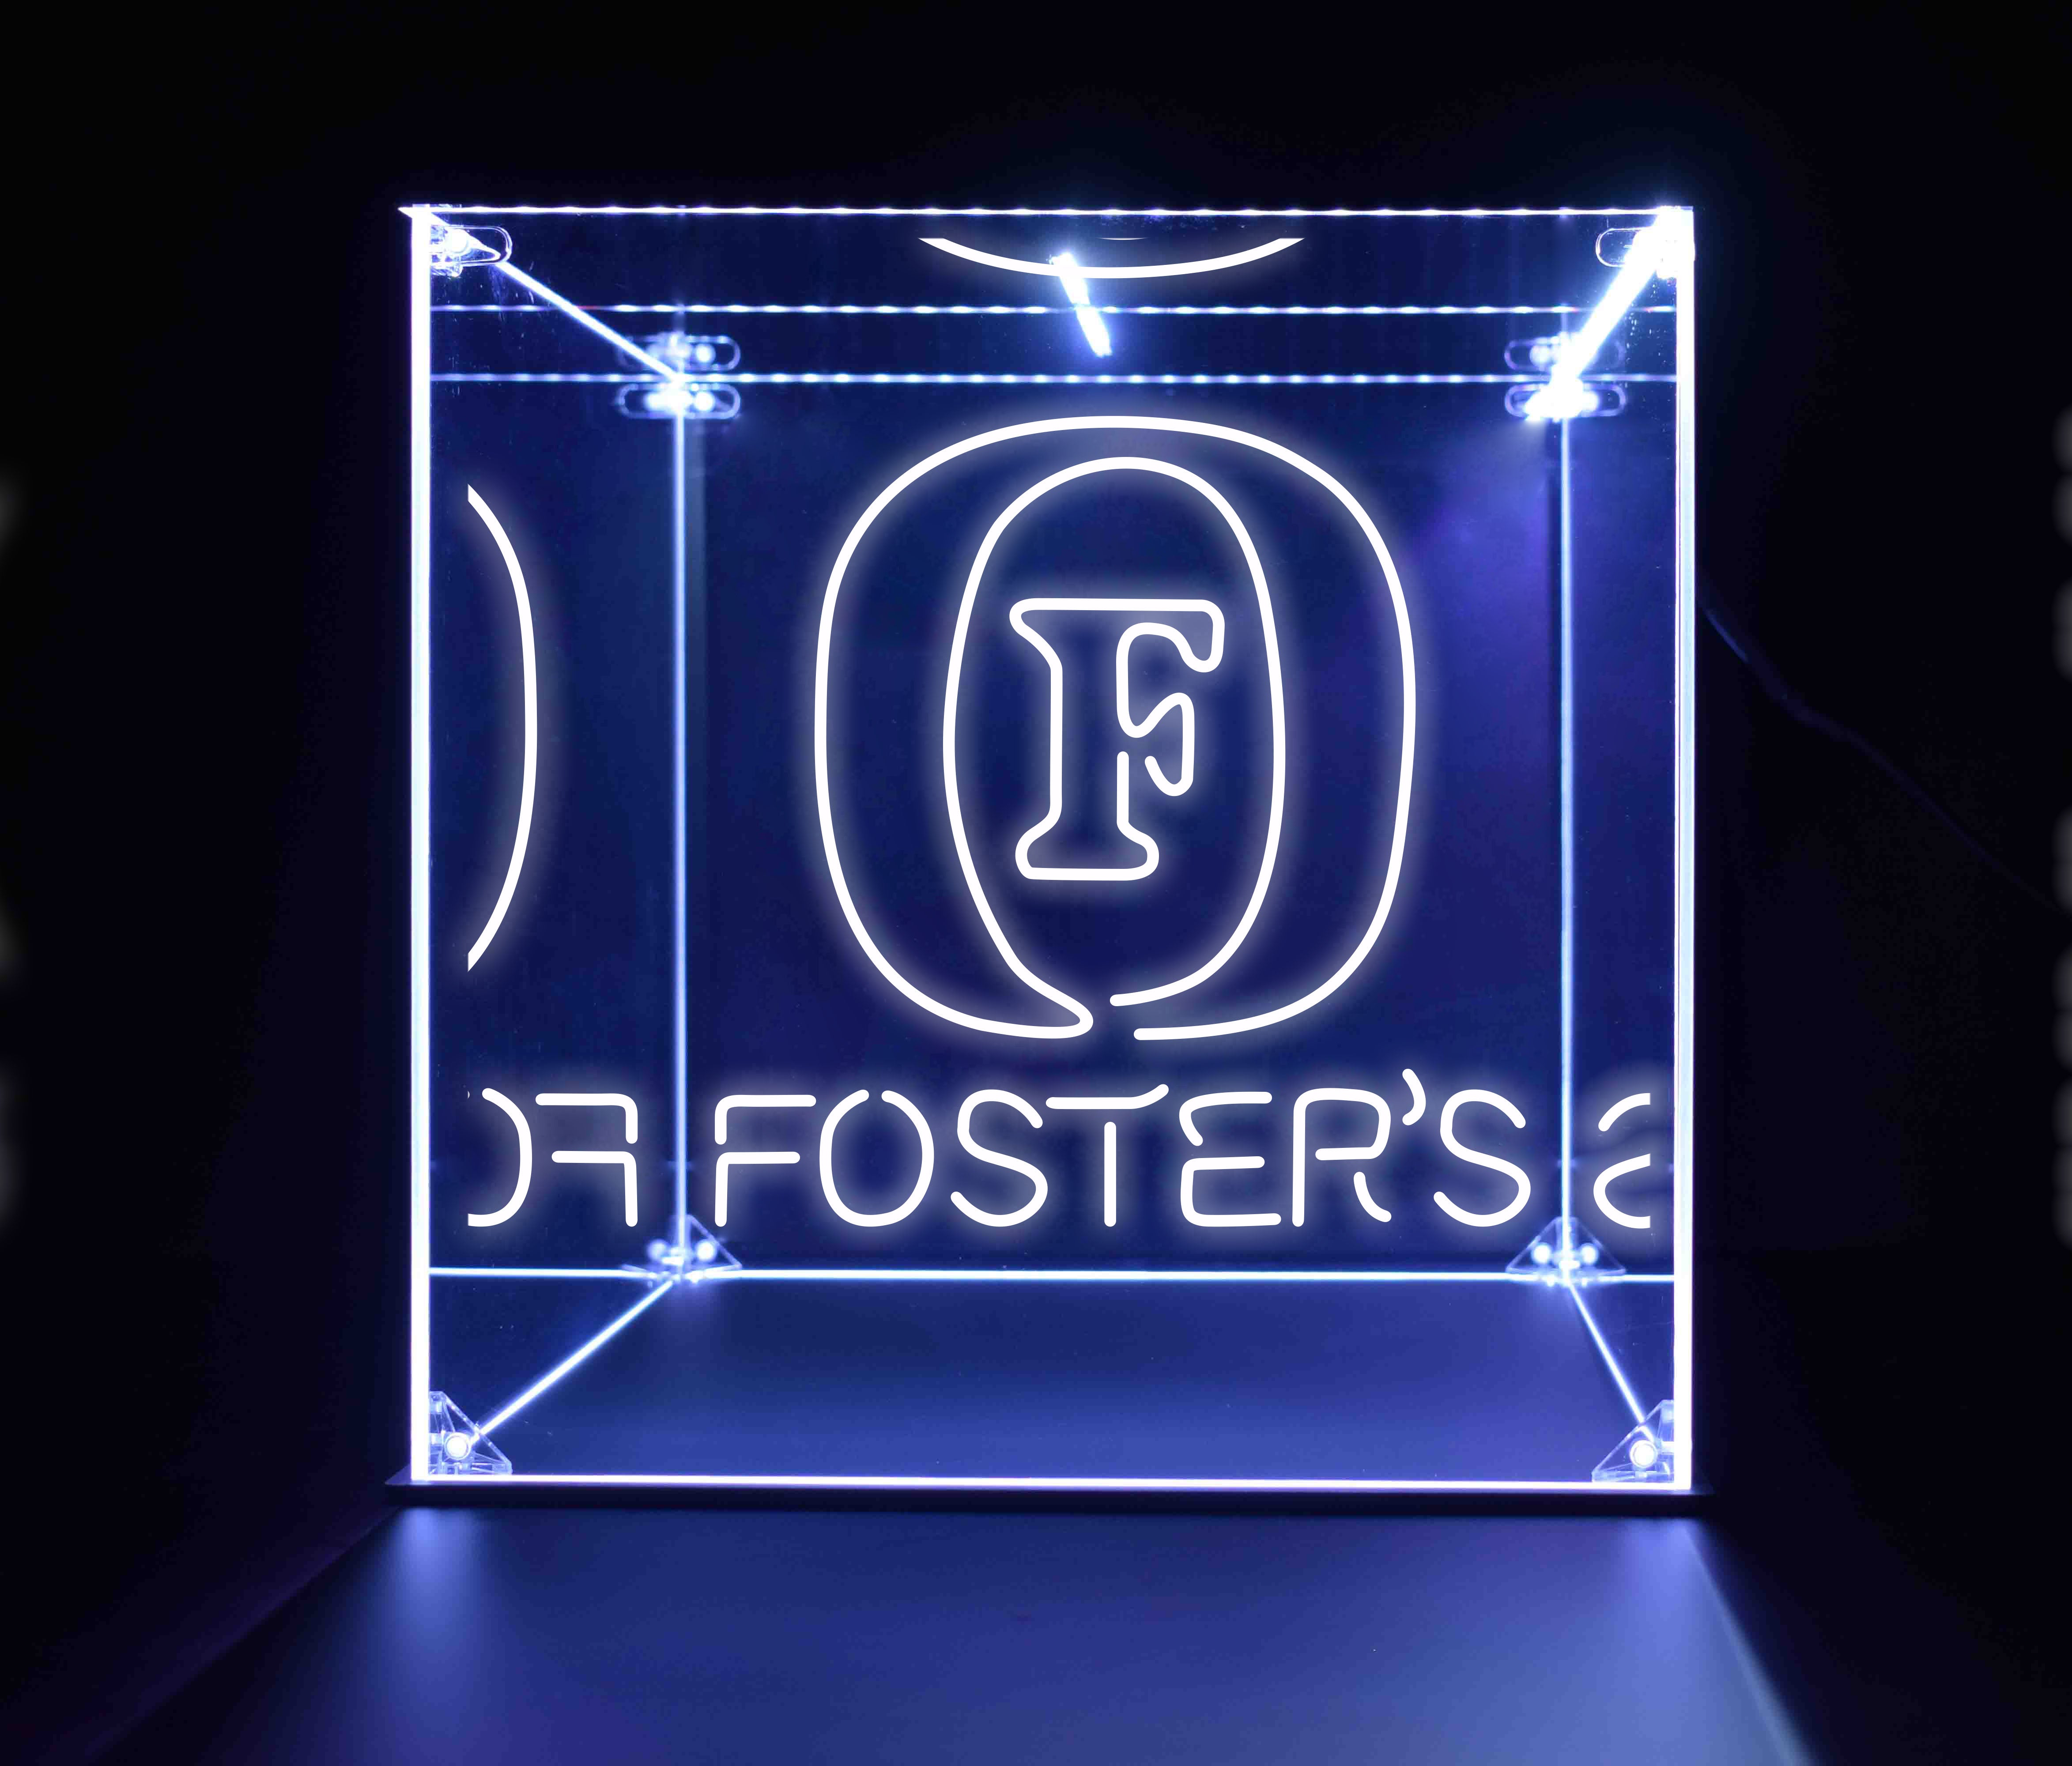 Wine, Champagne, Liquor, Beverage Bottle LED Display Case, Foster's Collection